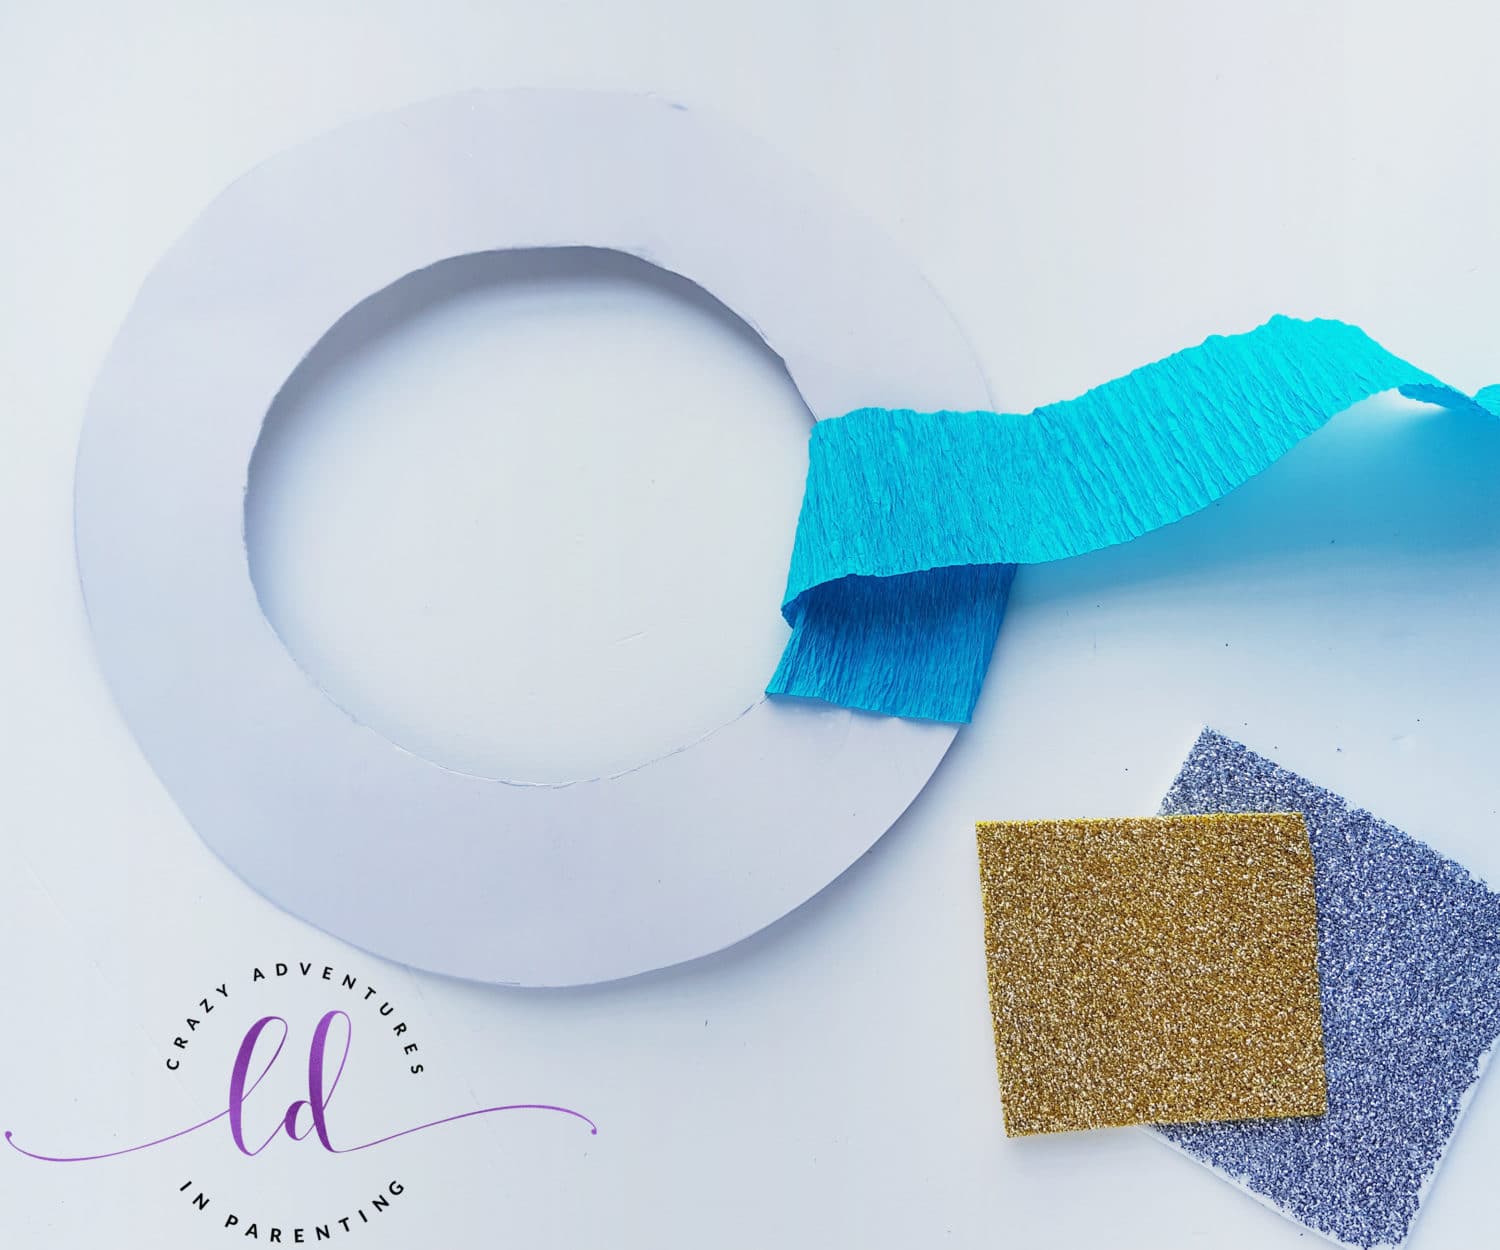 Begin Wrapping Crepe Paper Around Wreath Base to Make This Easy Frozen Wreath Craft